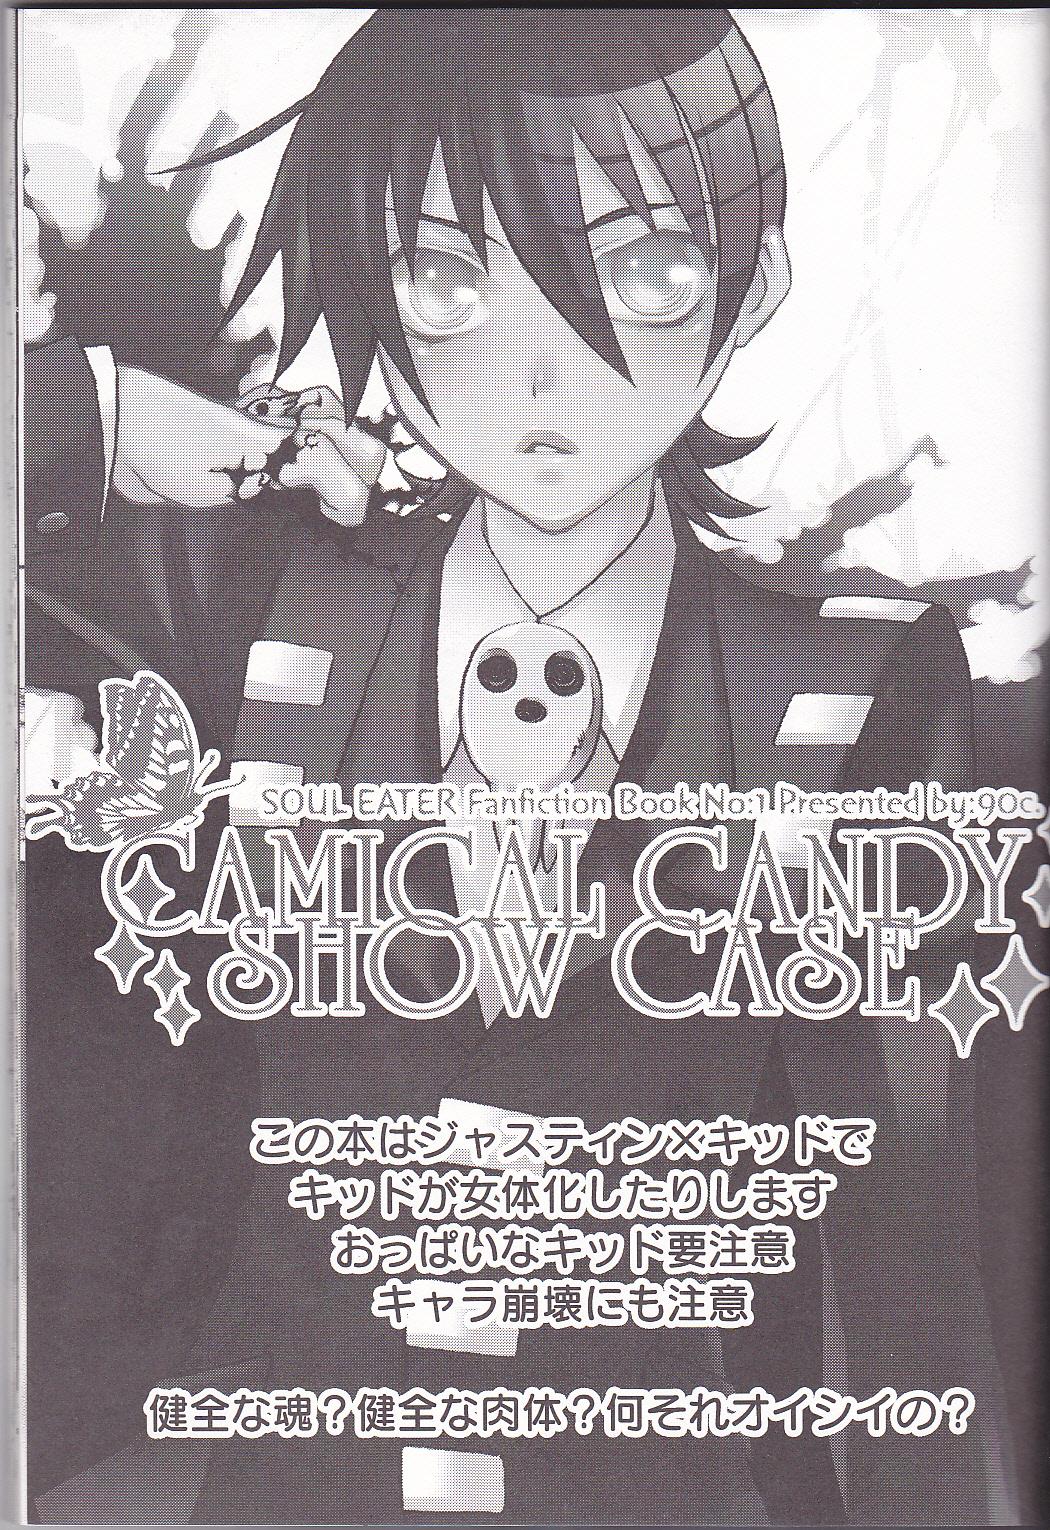 Camical Candy Show Case 1